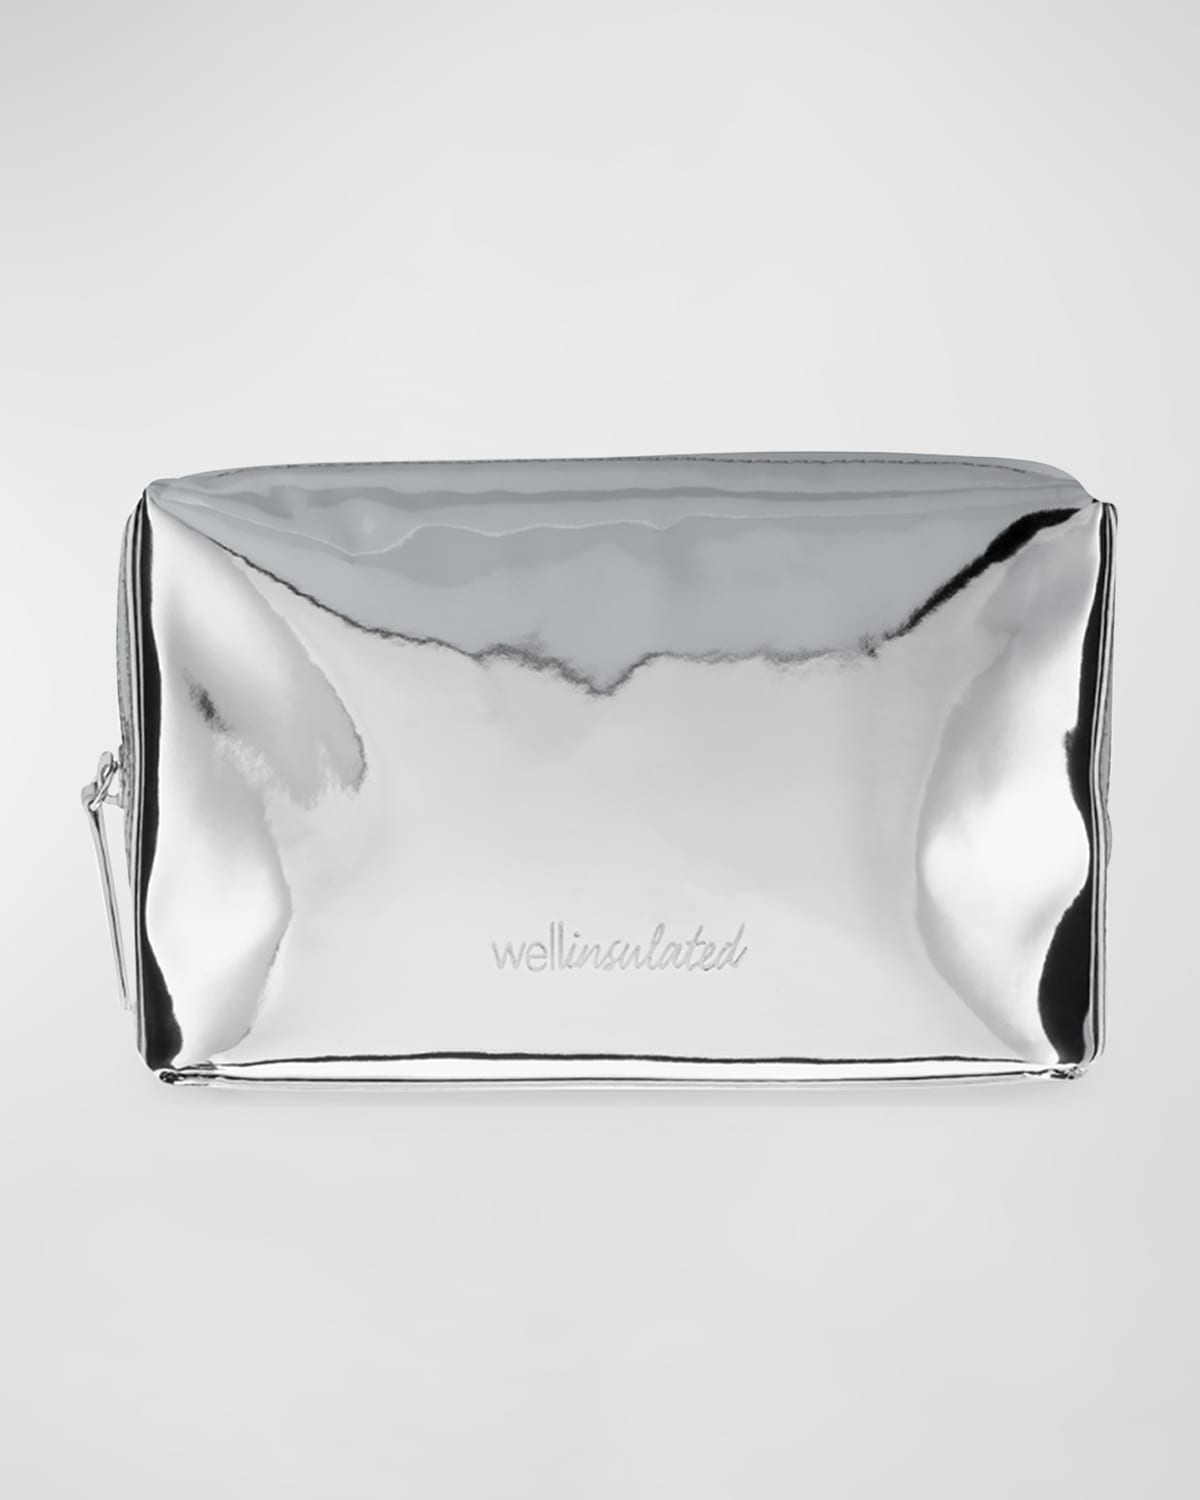 Shop Wellinsulated Performance Beauty Bag In Silver